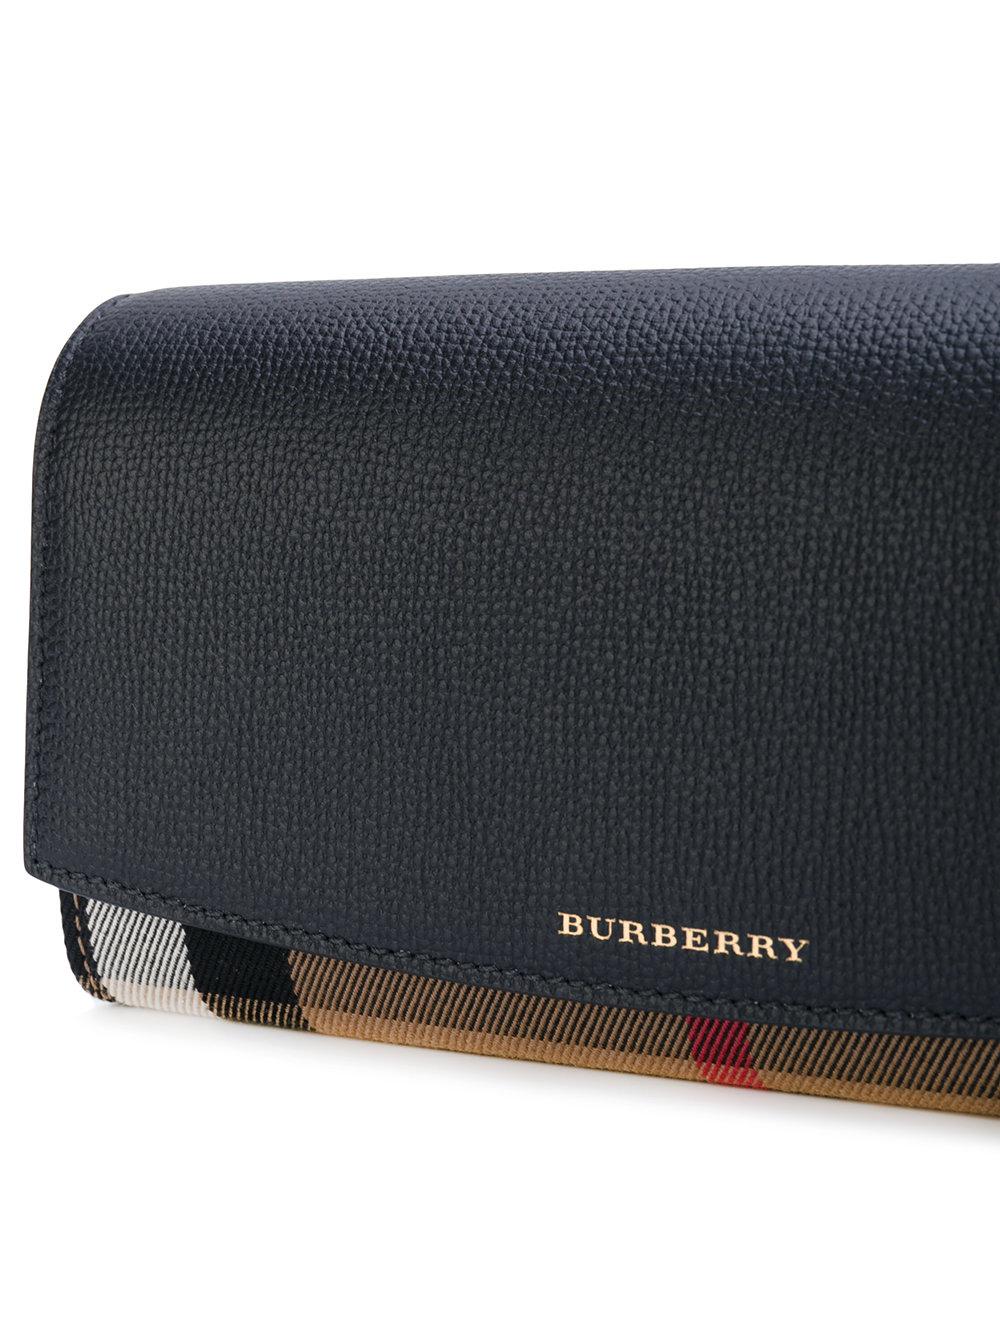 burberry wallet with strap